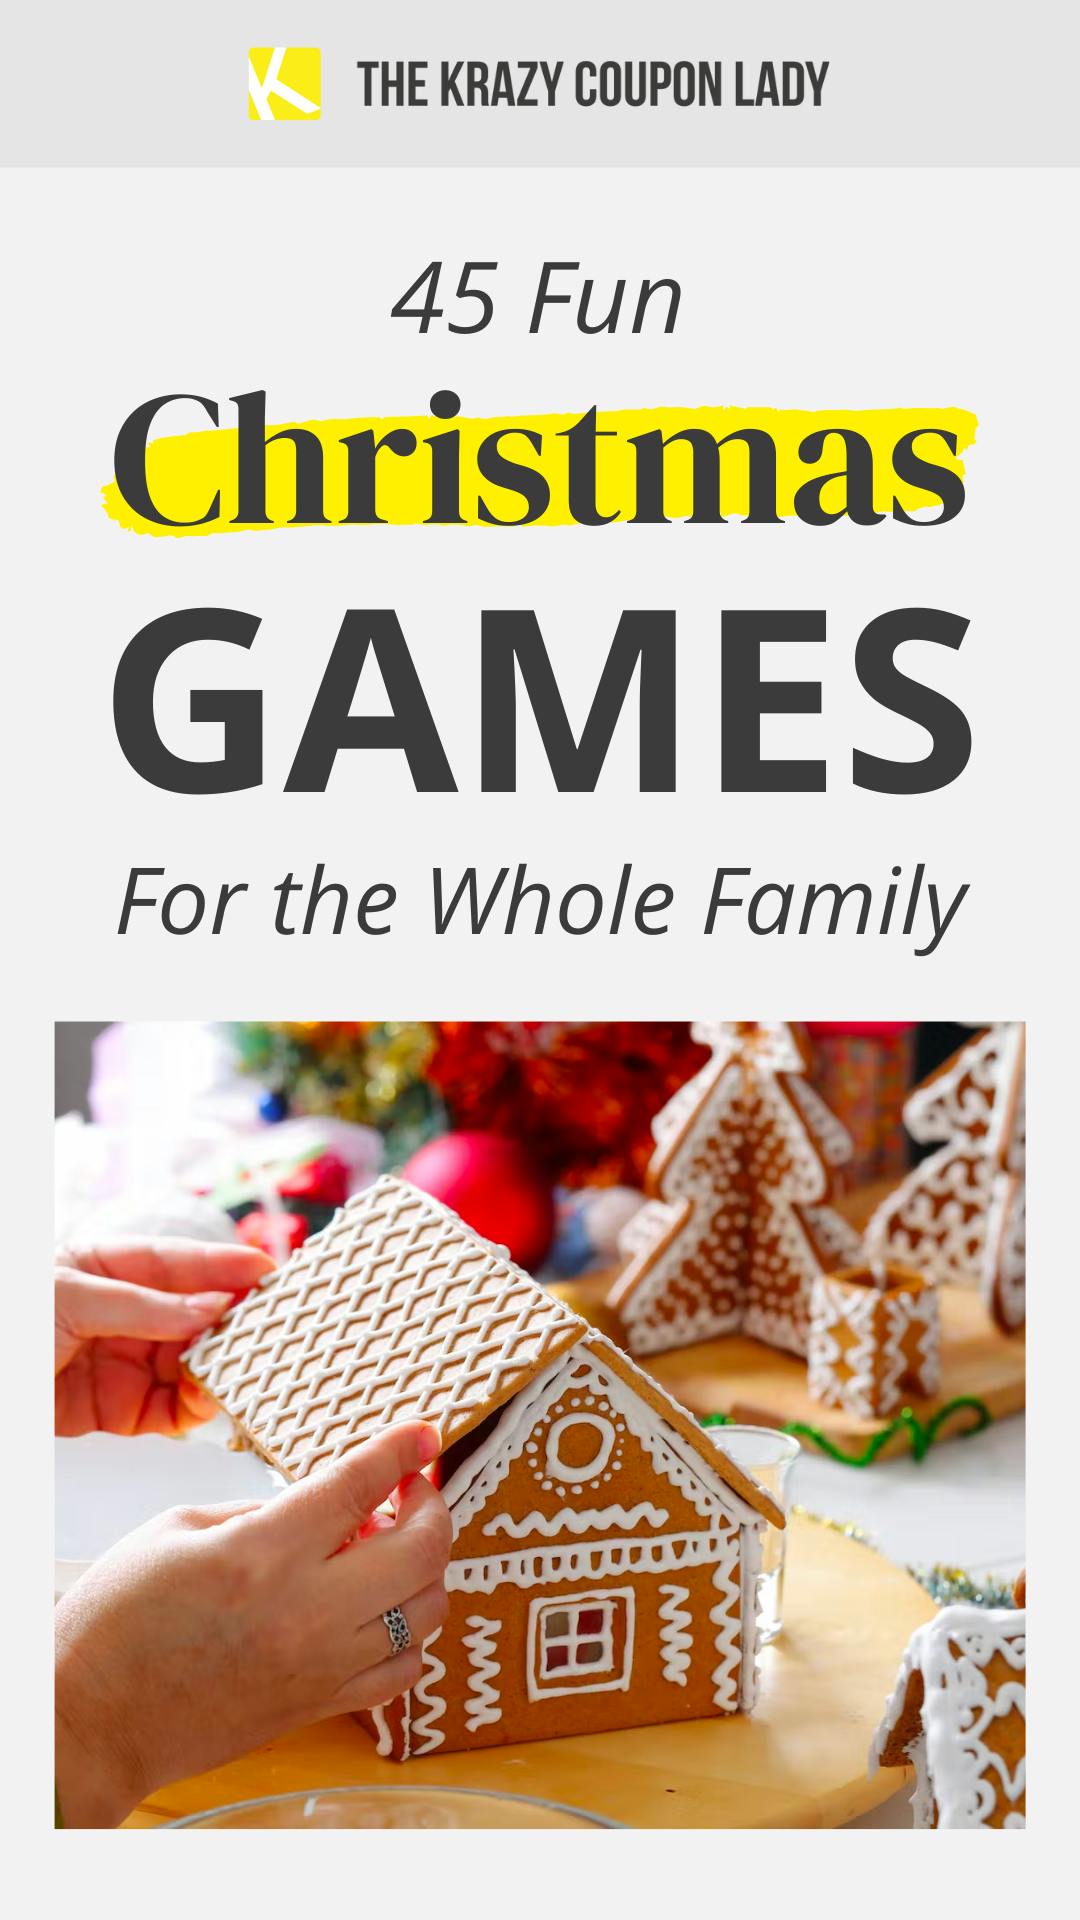 45 Fun Christmas Games for the Whole Family